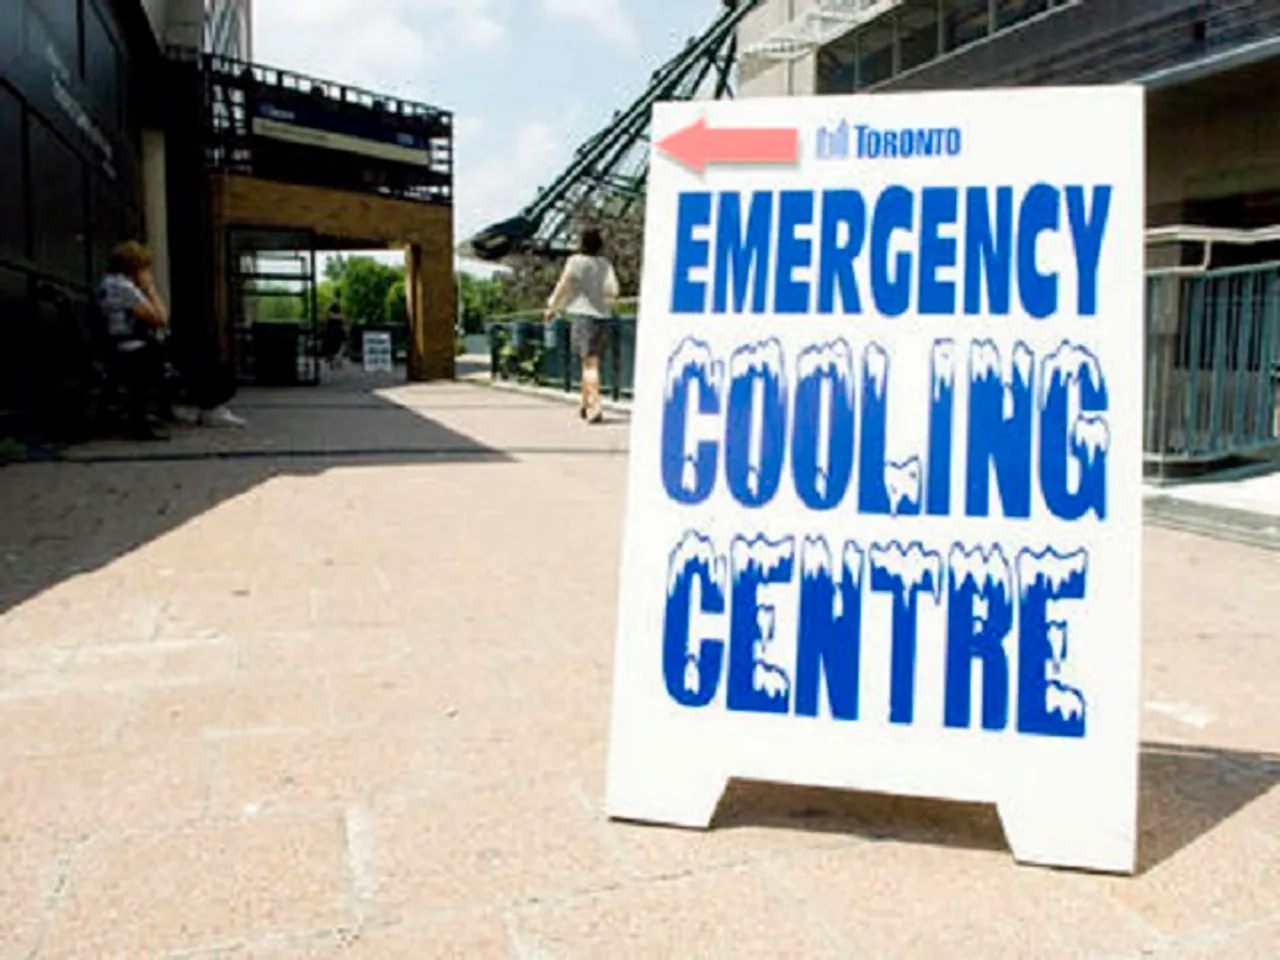 Stay Cool and Safe: Cooling centers opened in Toronto as Heat warning extended